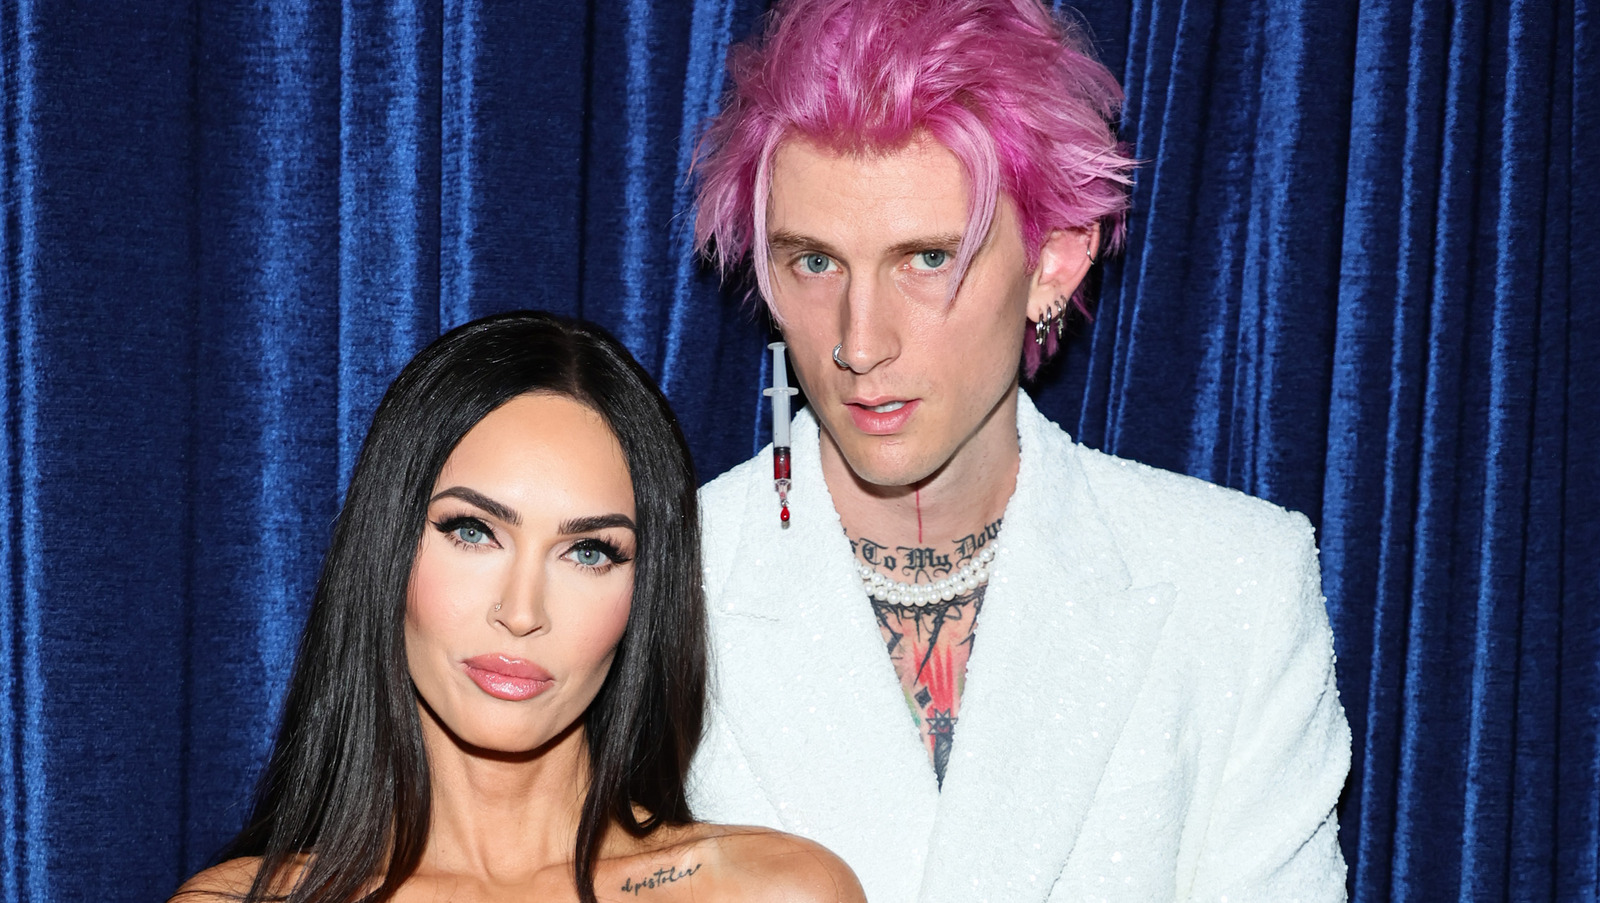 Where Did MGK Cheating on Megan Fox Rumors Come From An Investigation